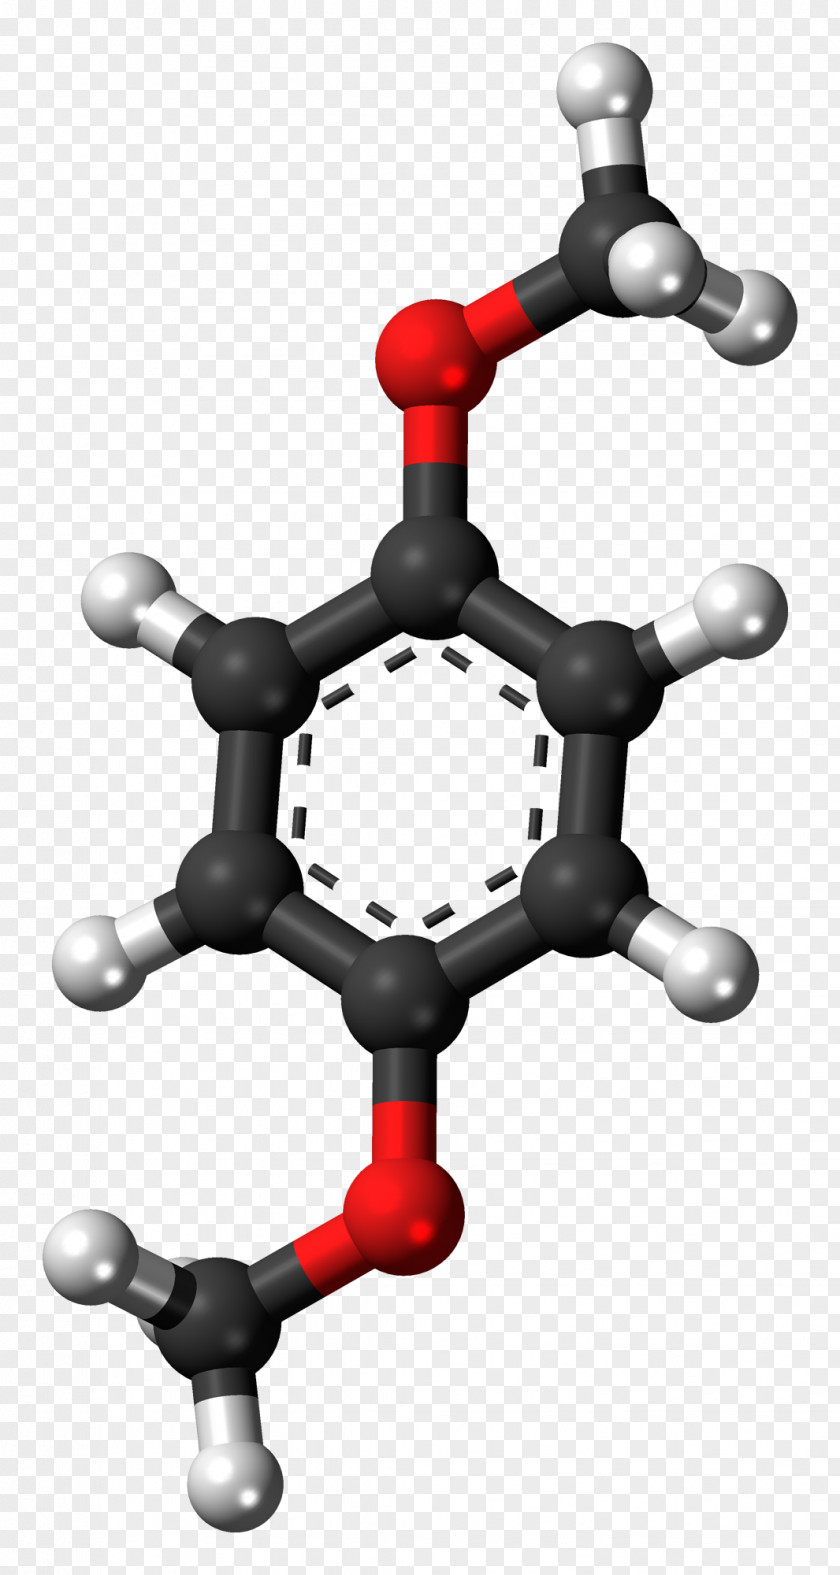 4-Nitroaniline Chemical Compound Chemistry Substance Amine PNG